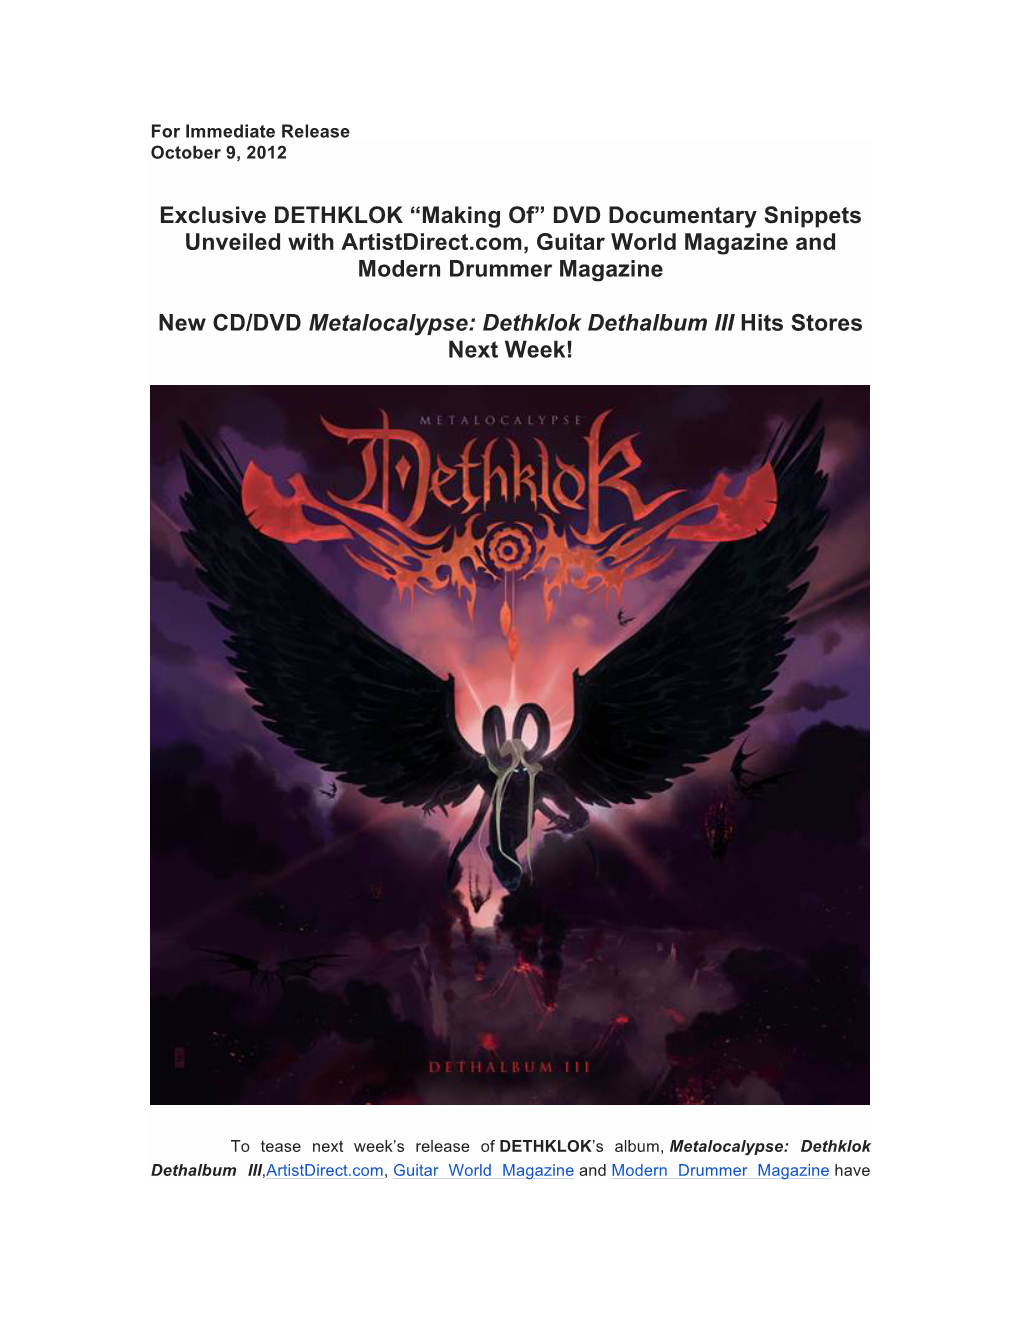 Exclusive DETHKLOK “Making Of” DVD Documentary Snippets Unveiled with Artistdirect.Com, Guitar World Magazine and Modern Drummer Magazine